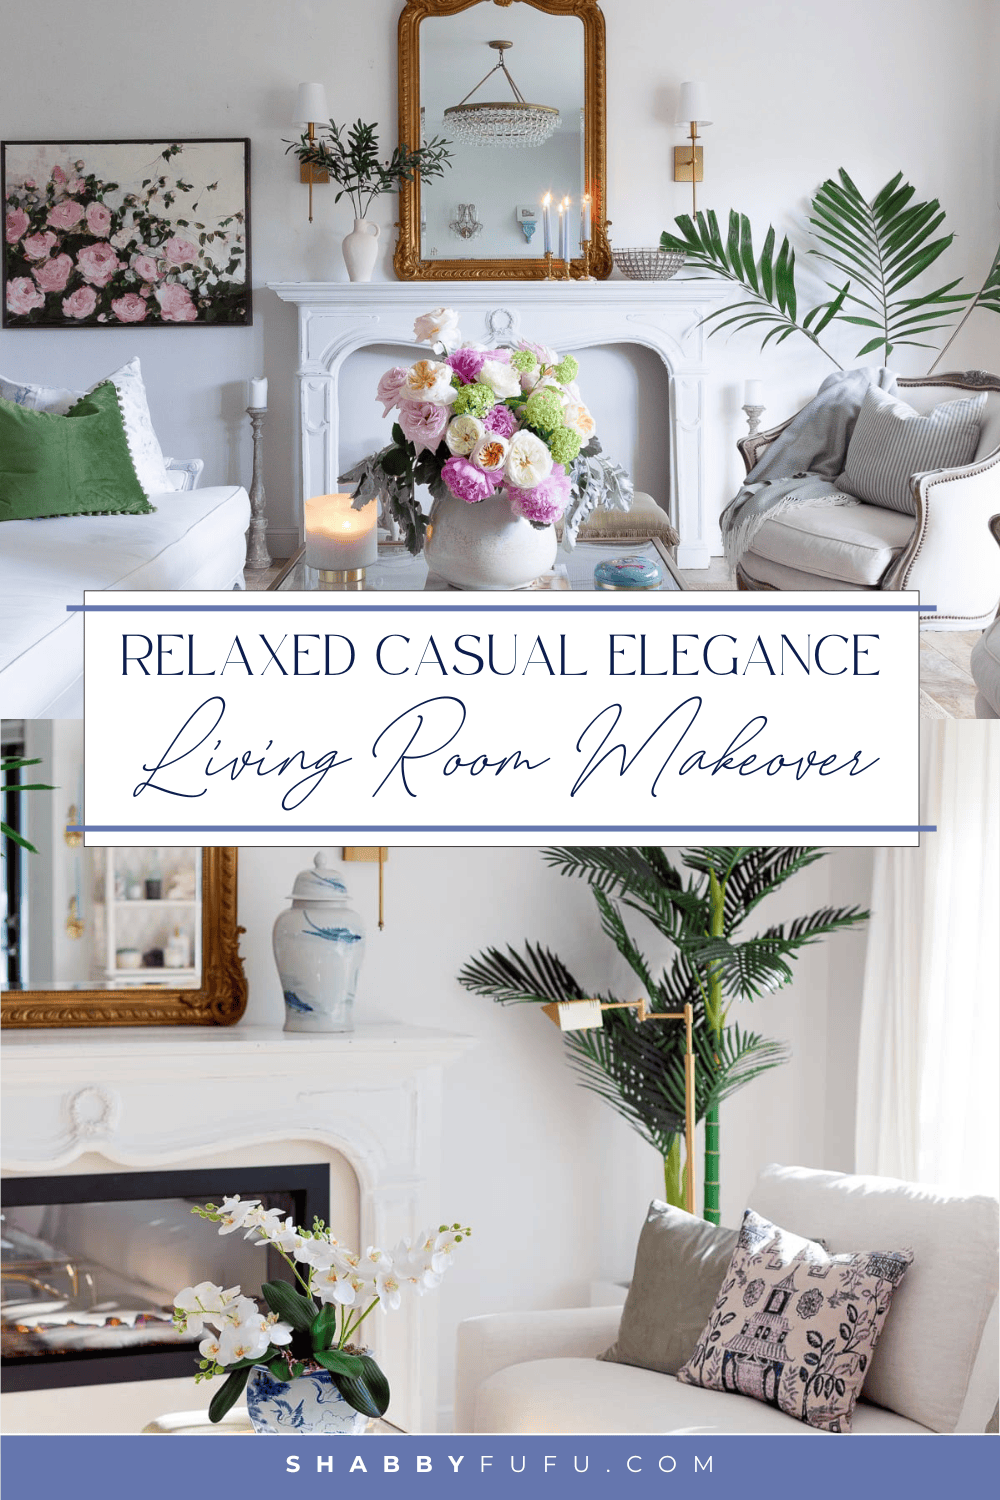 Pinterest decorative graphic featuring a collage of images with the title "Relaxed Casual Elegance: Living Room Makeover: Reveal!"